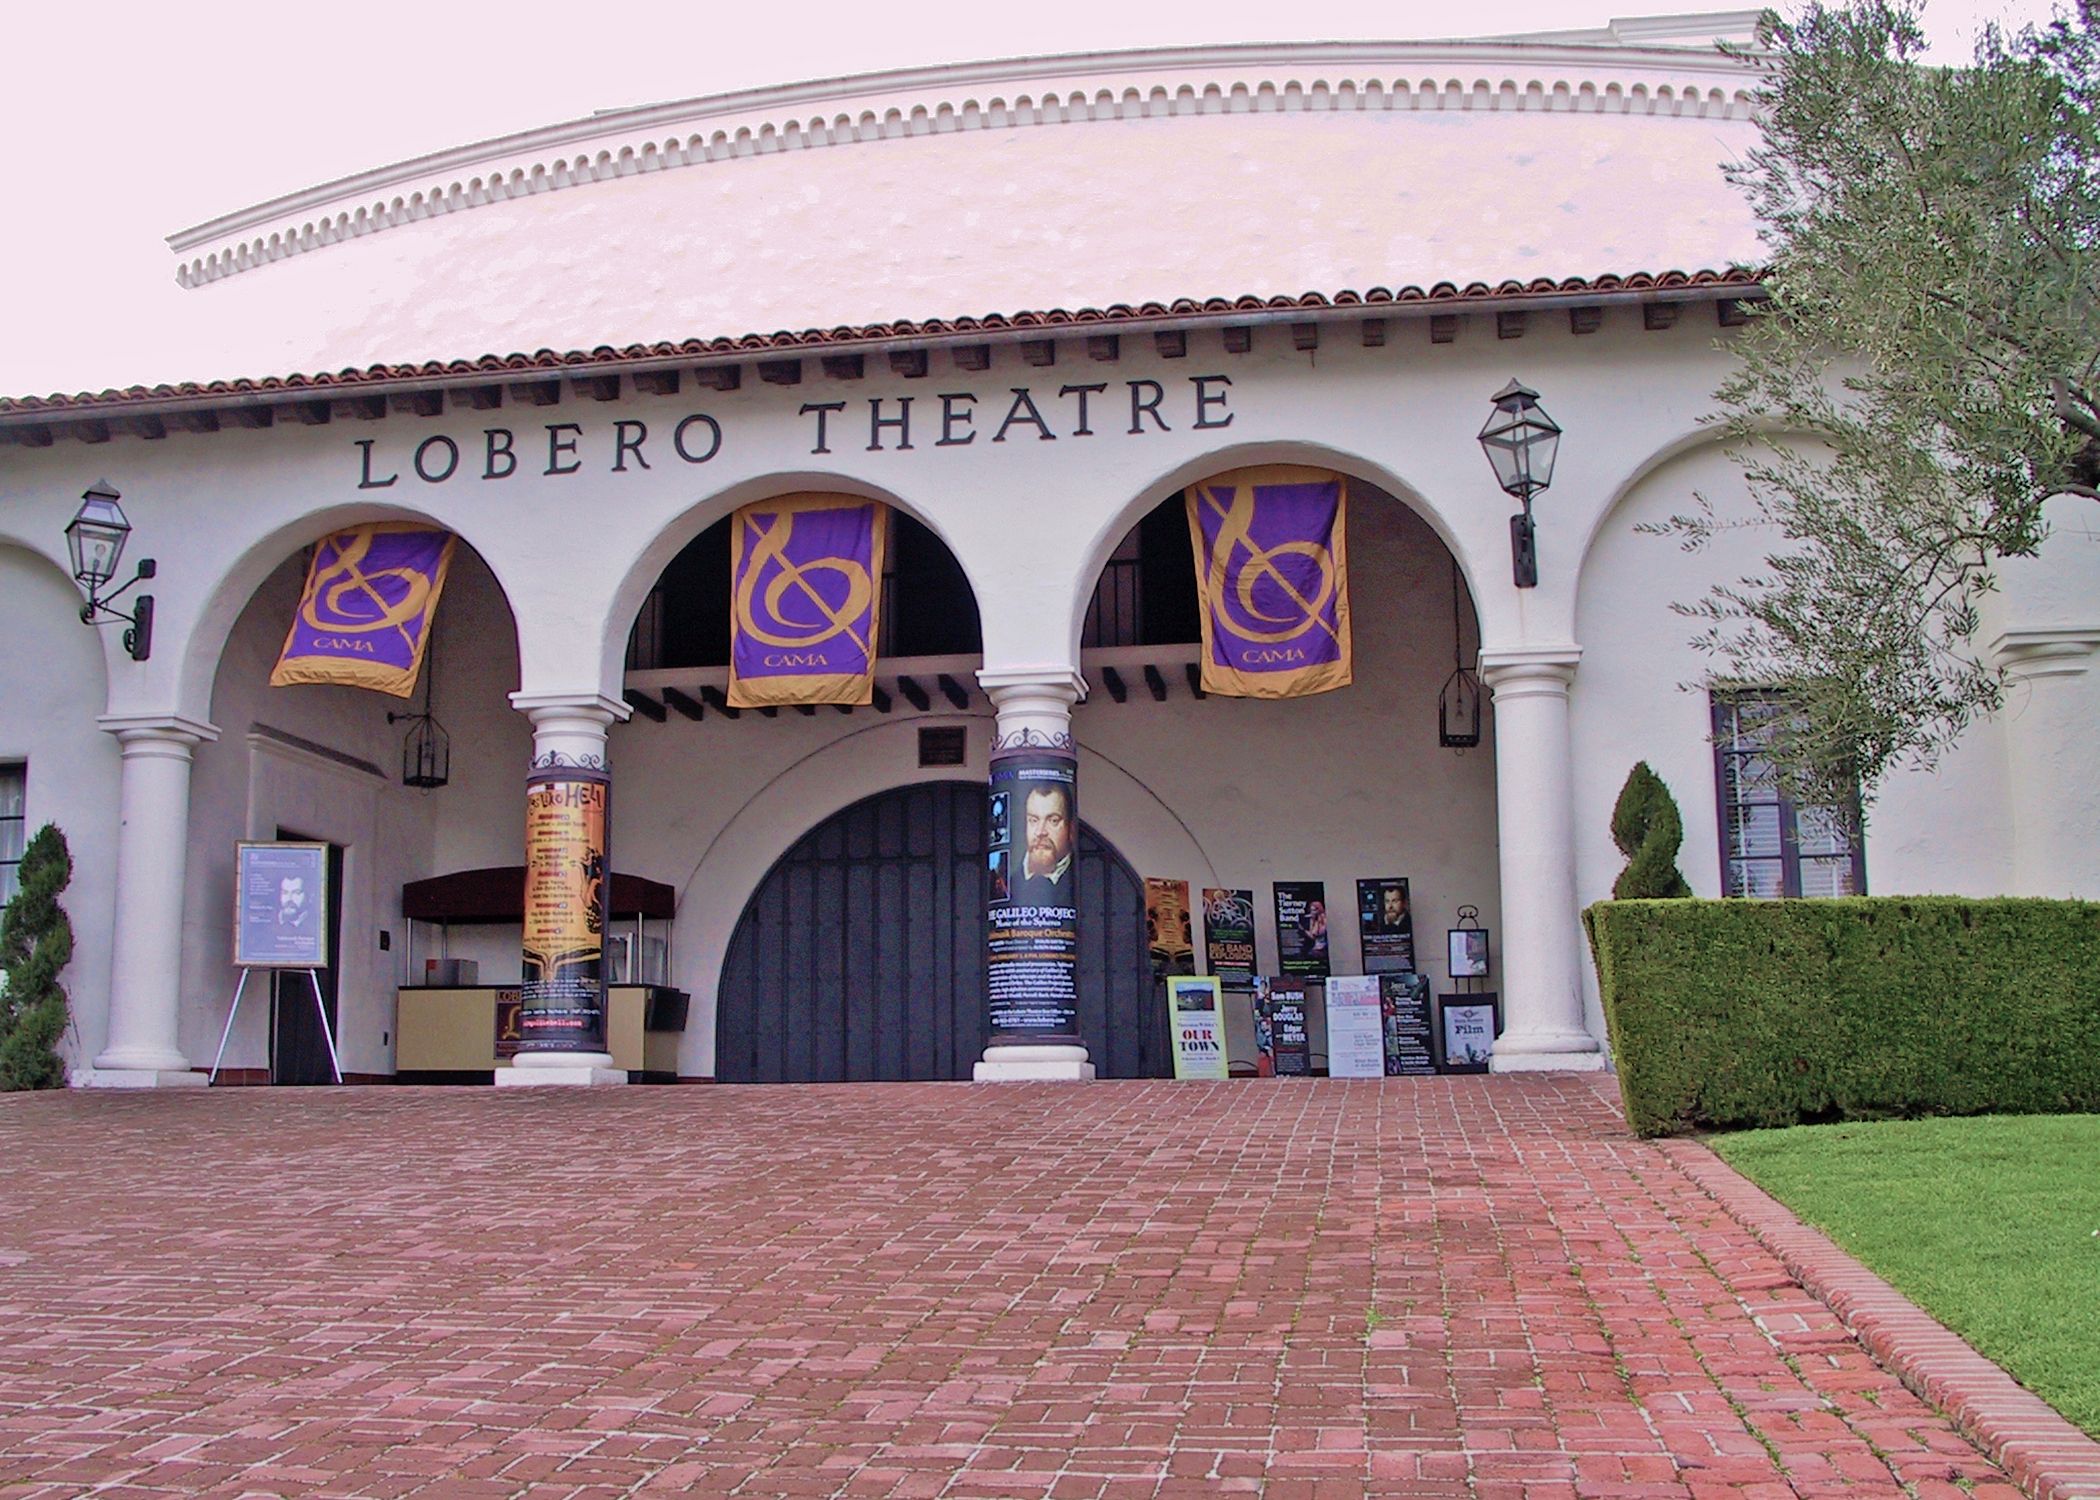 The front of the Lobero Theater with its red brick sidewalk and columns with banners hanging from the arches